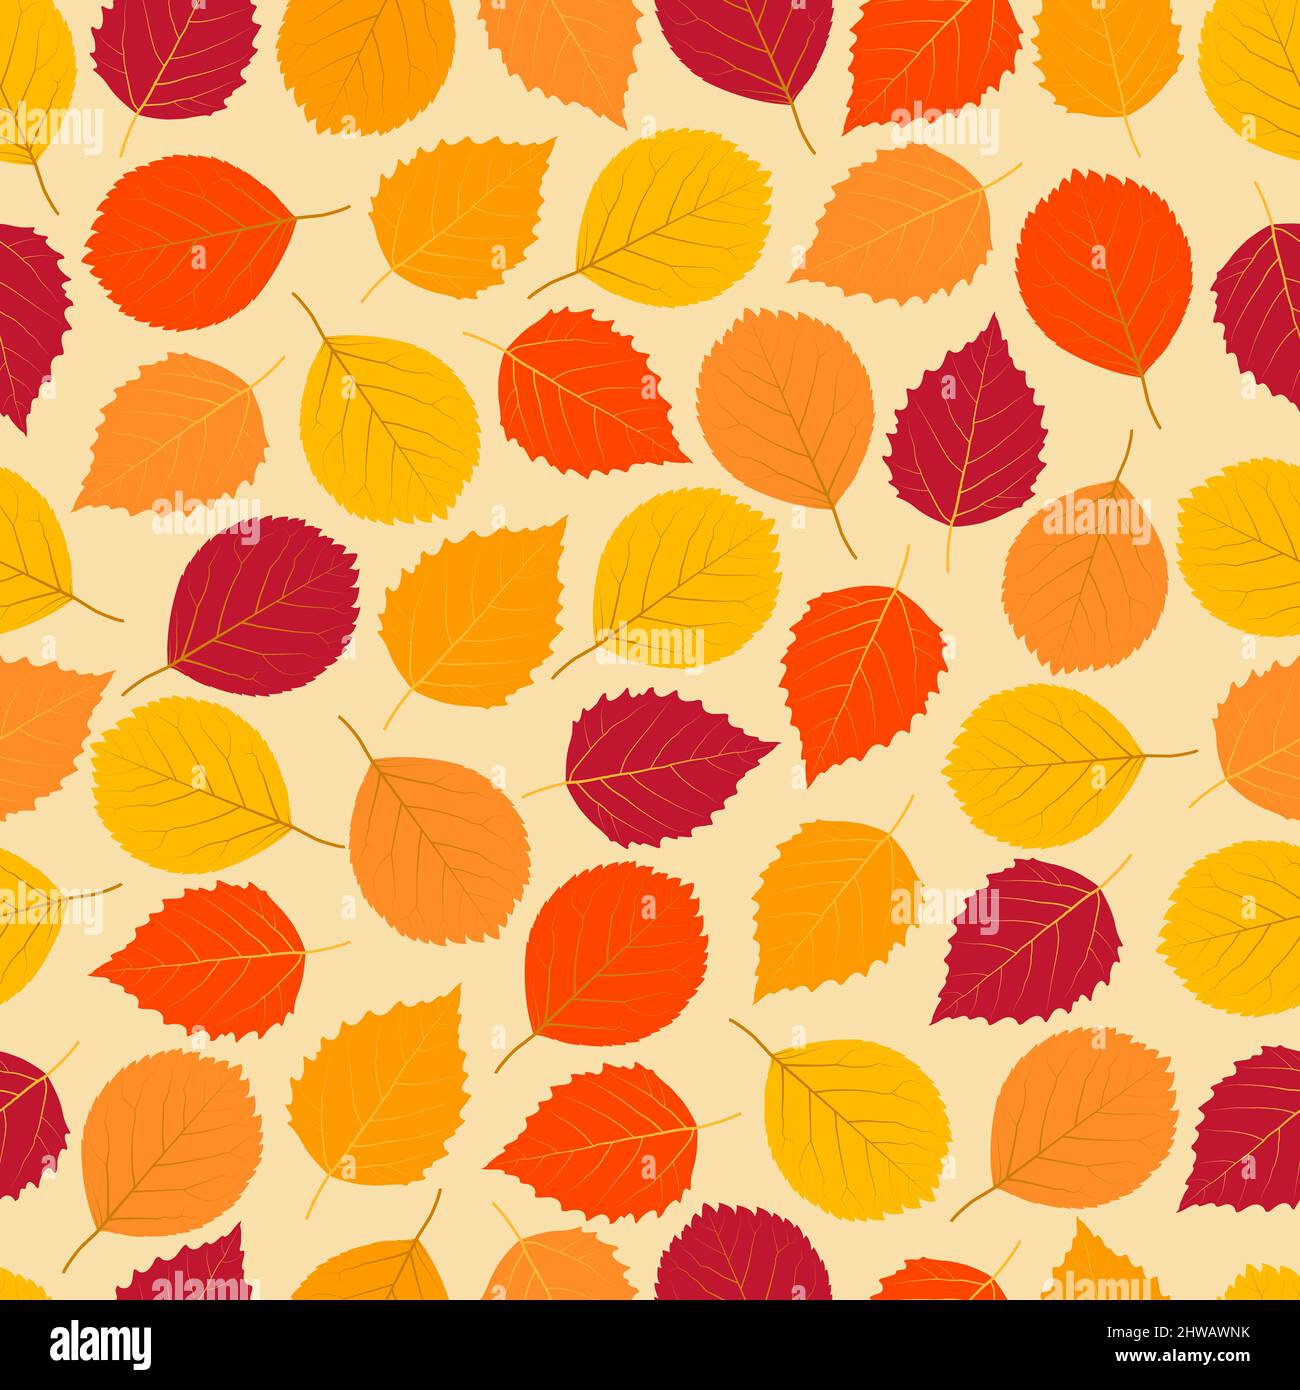 Elegant trendy ditsy vector floral seamless pattern design of autumn color aspen leaves. Repeat texture foliate background for printing and textile Stock Vector